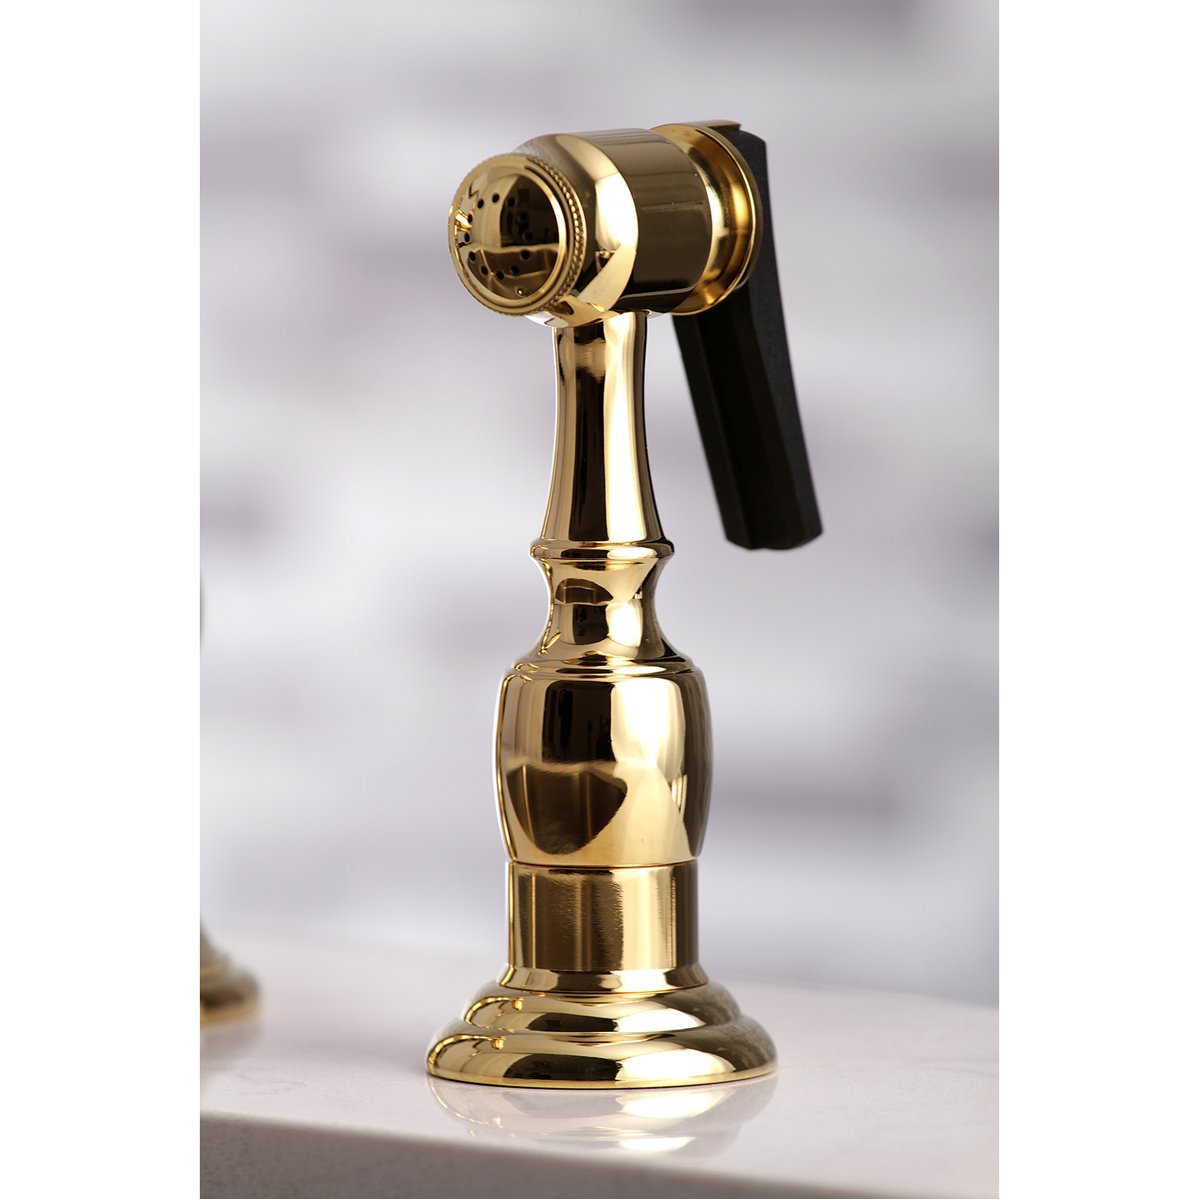 Kingston Brass English Country Kitchen Faucet with Side Sprayer